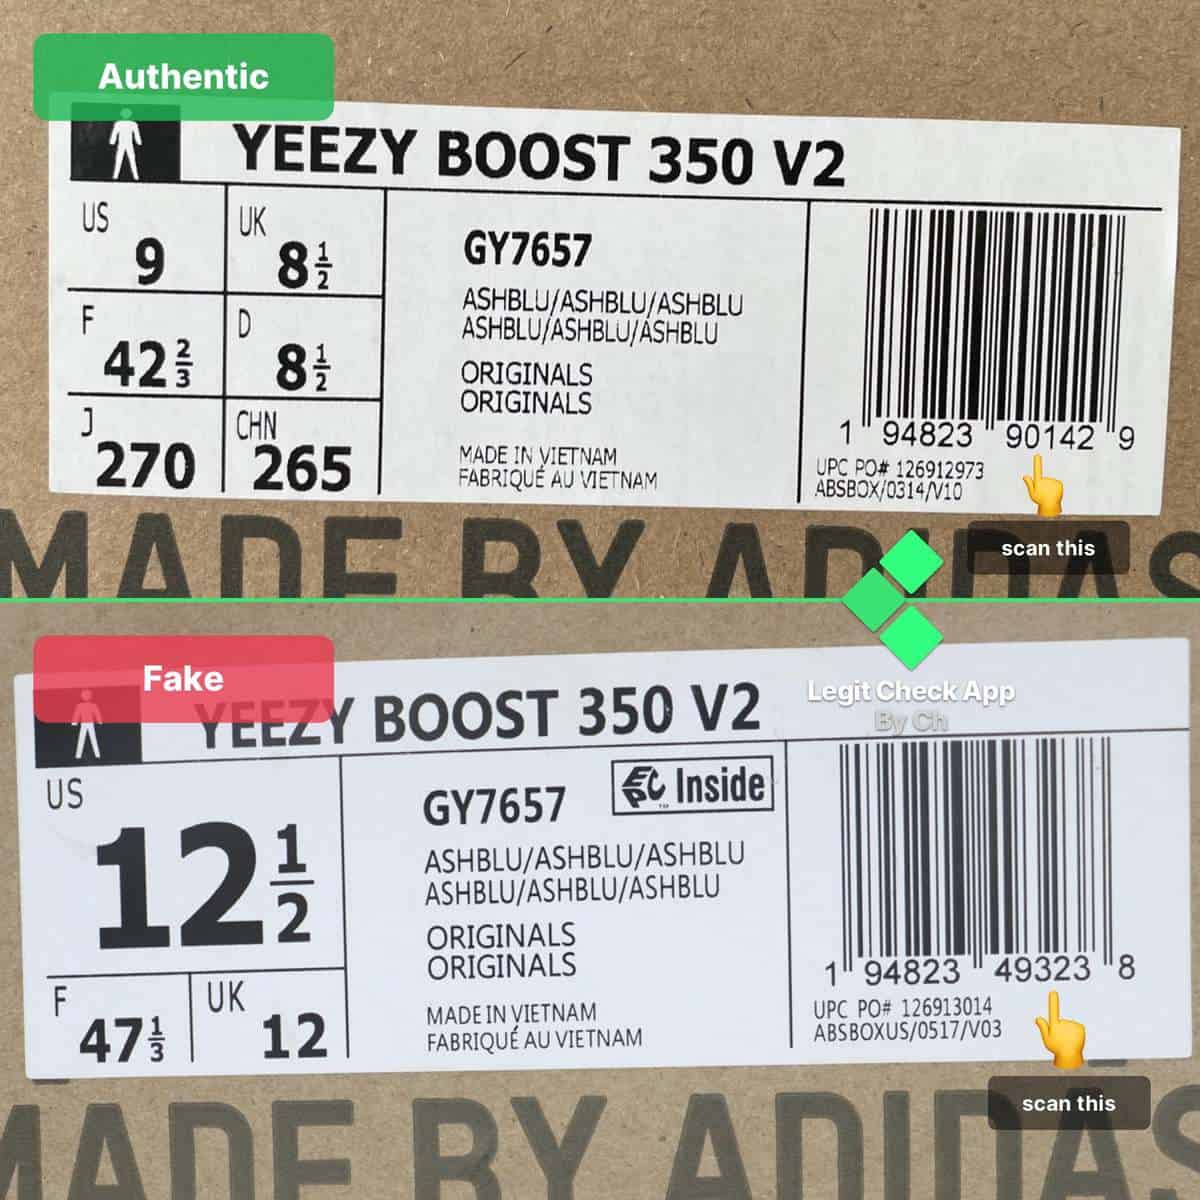 There's an Entire Fake Yeezy Store in China